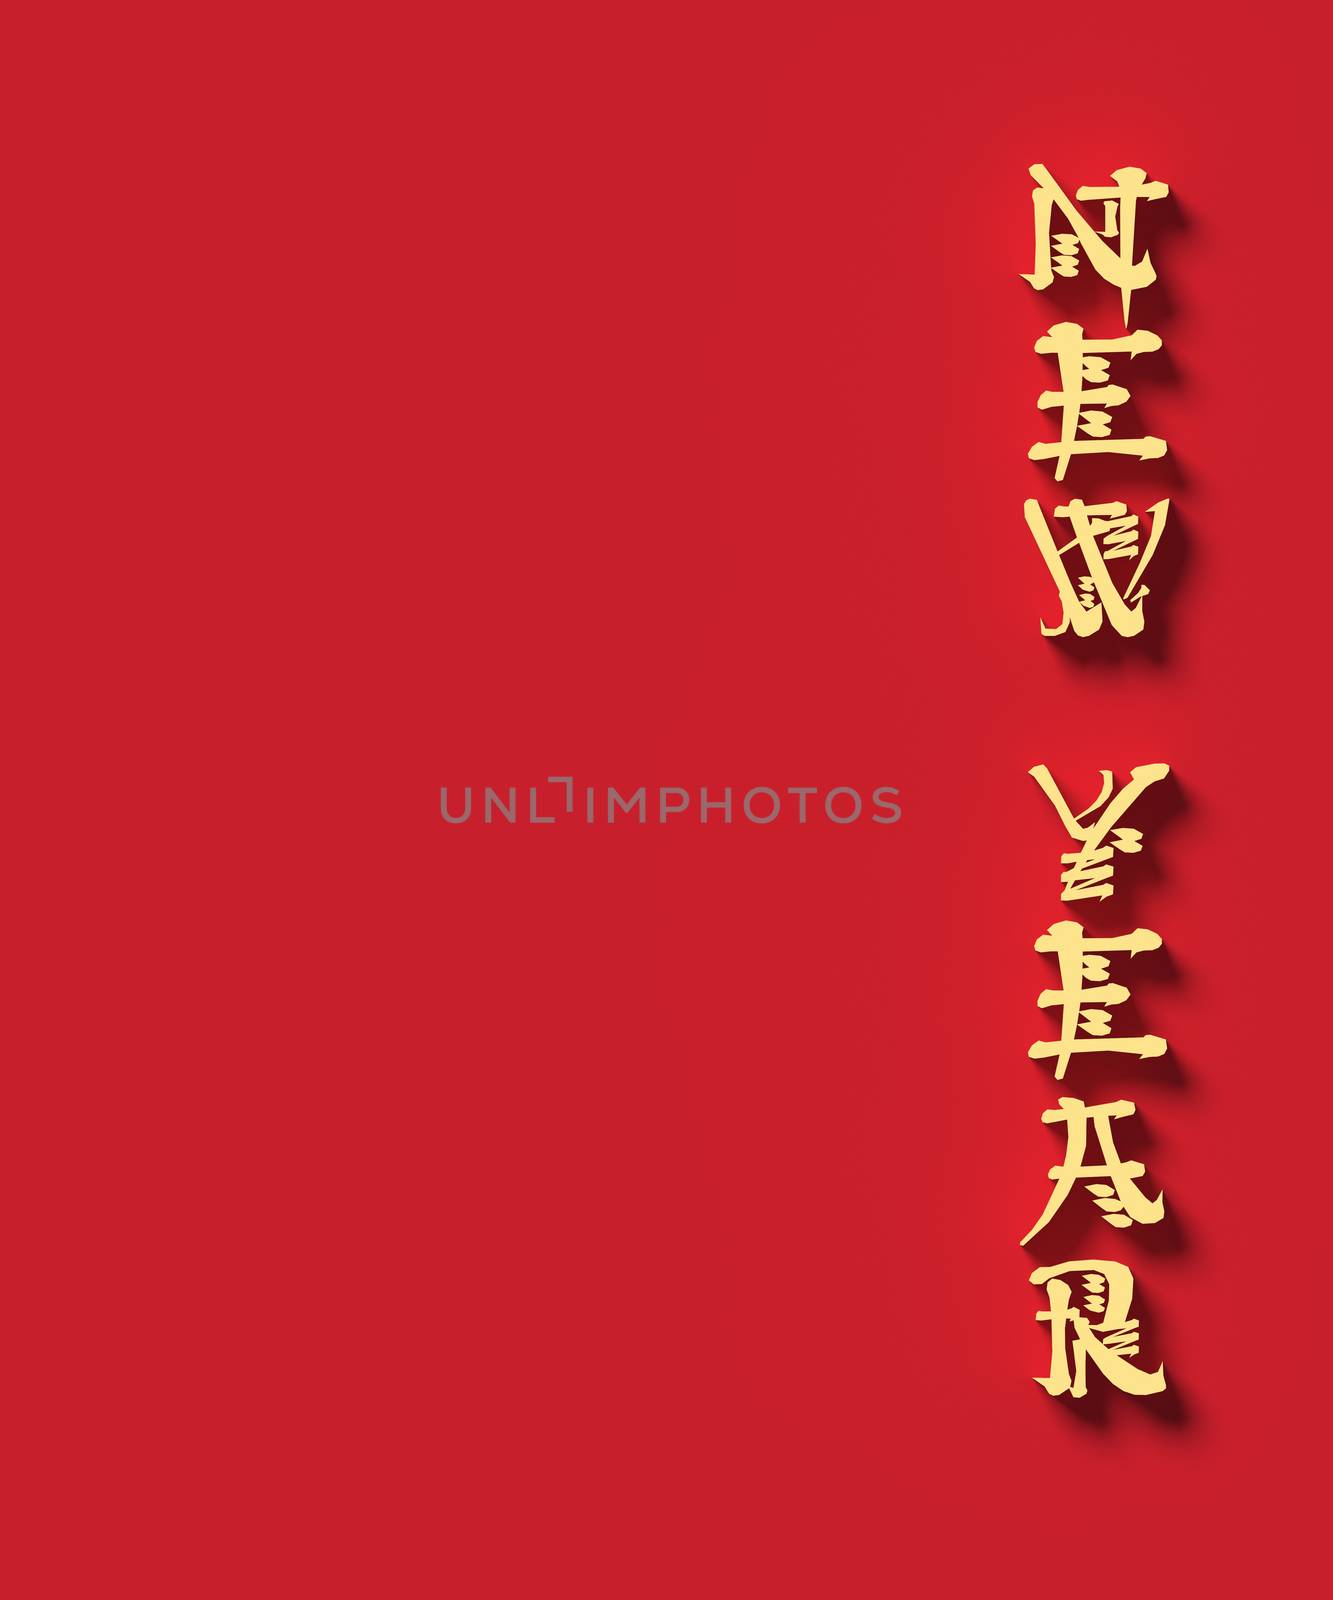 COLOR PHOTO OF 3D WORDS 'NEW YEAR' ON PLAIN BACKGROUND